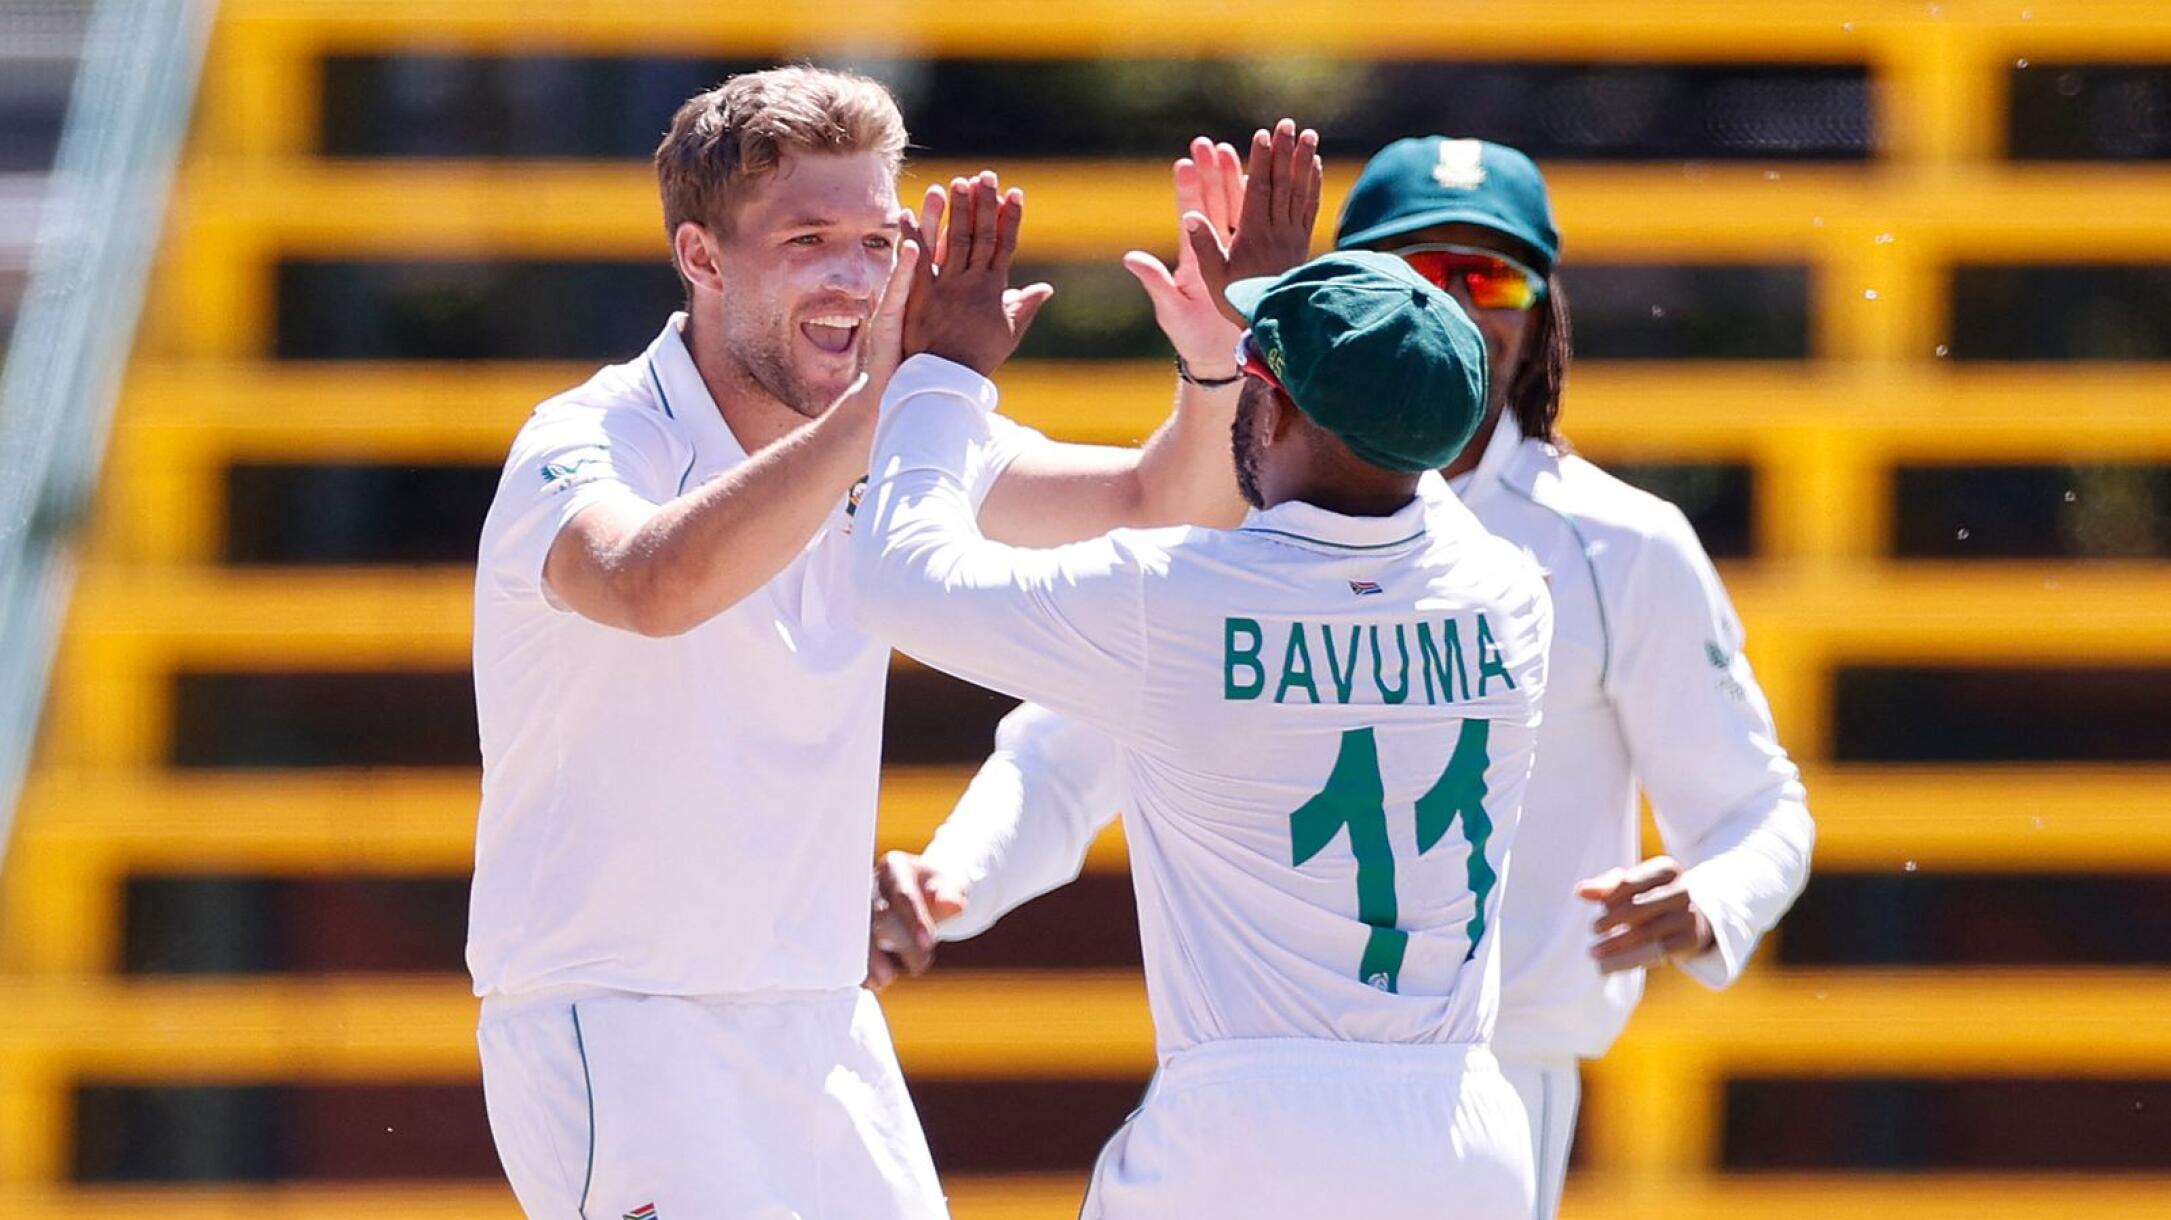 South Africa's Temba Bavuma celebrates with Wiaan Mulder after running out Tagenarine Chanderpaul (not seen) of the West Indies during the second day of the second Test at The Wanderers in Johannesburg on Thursday